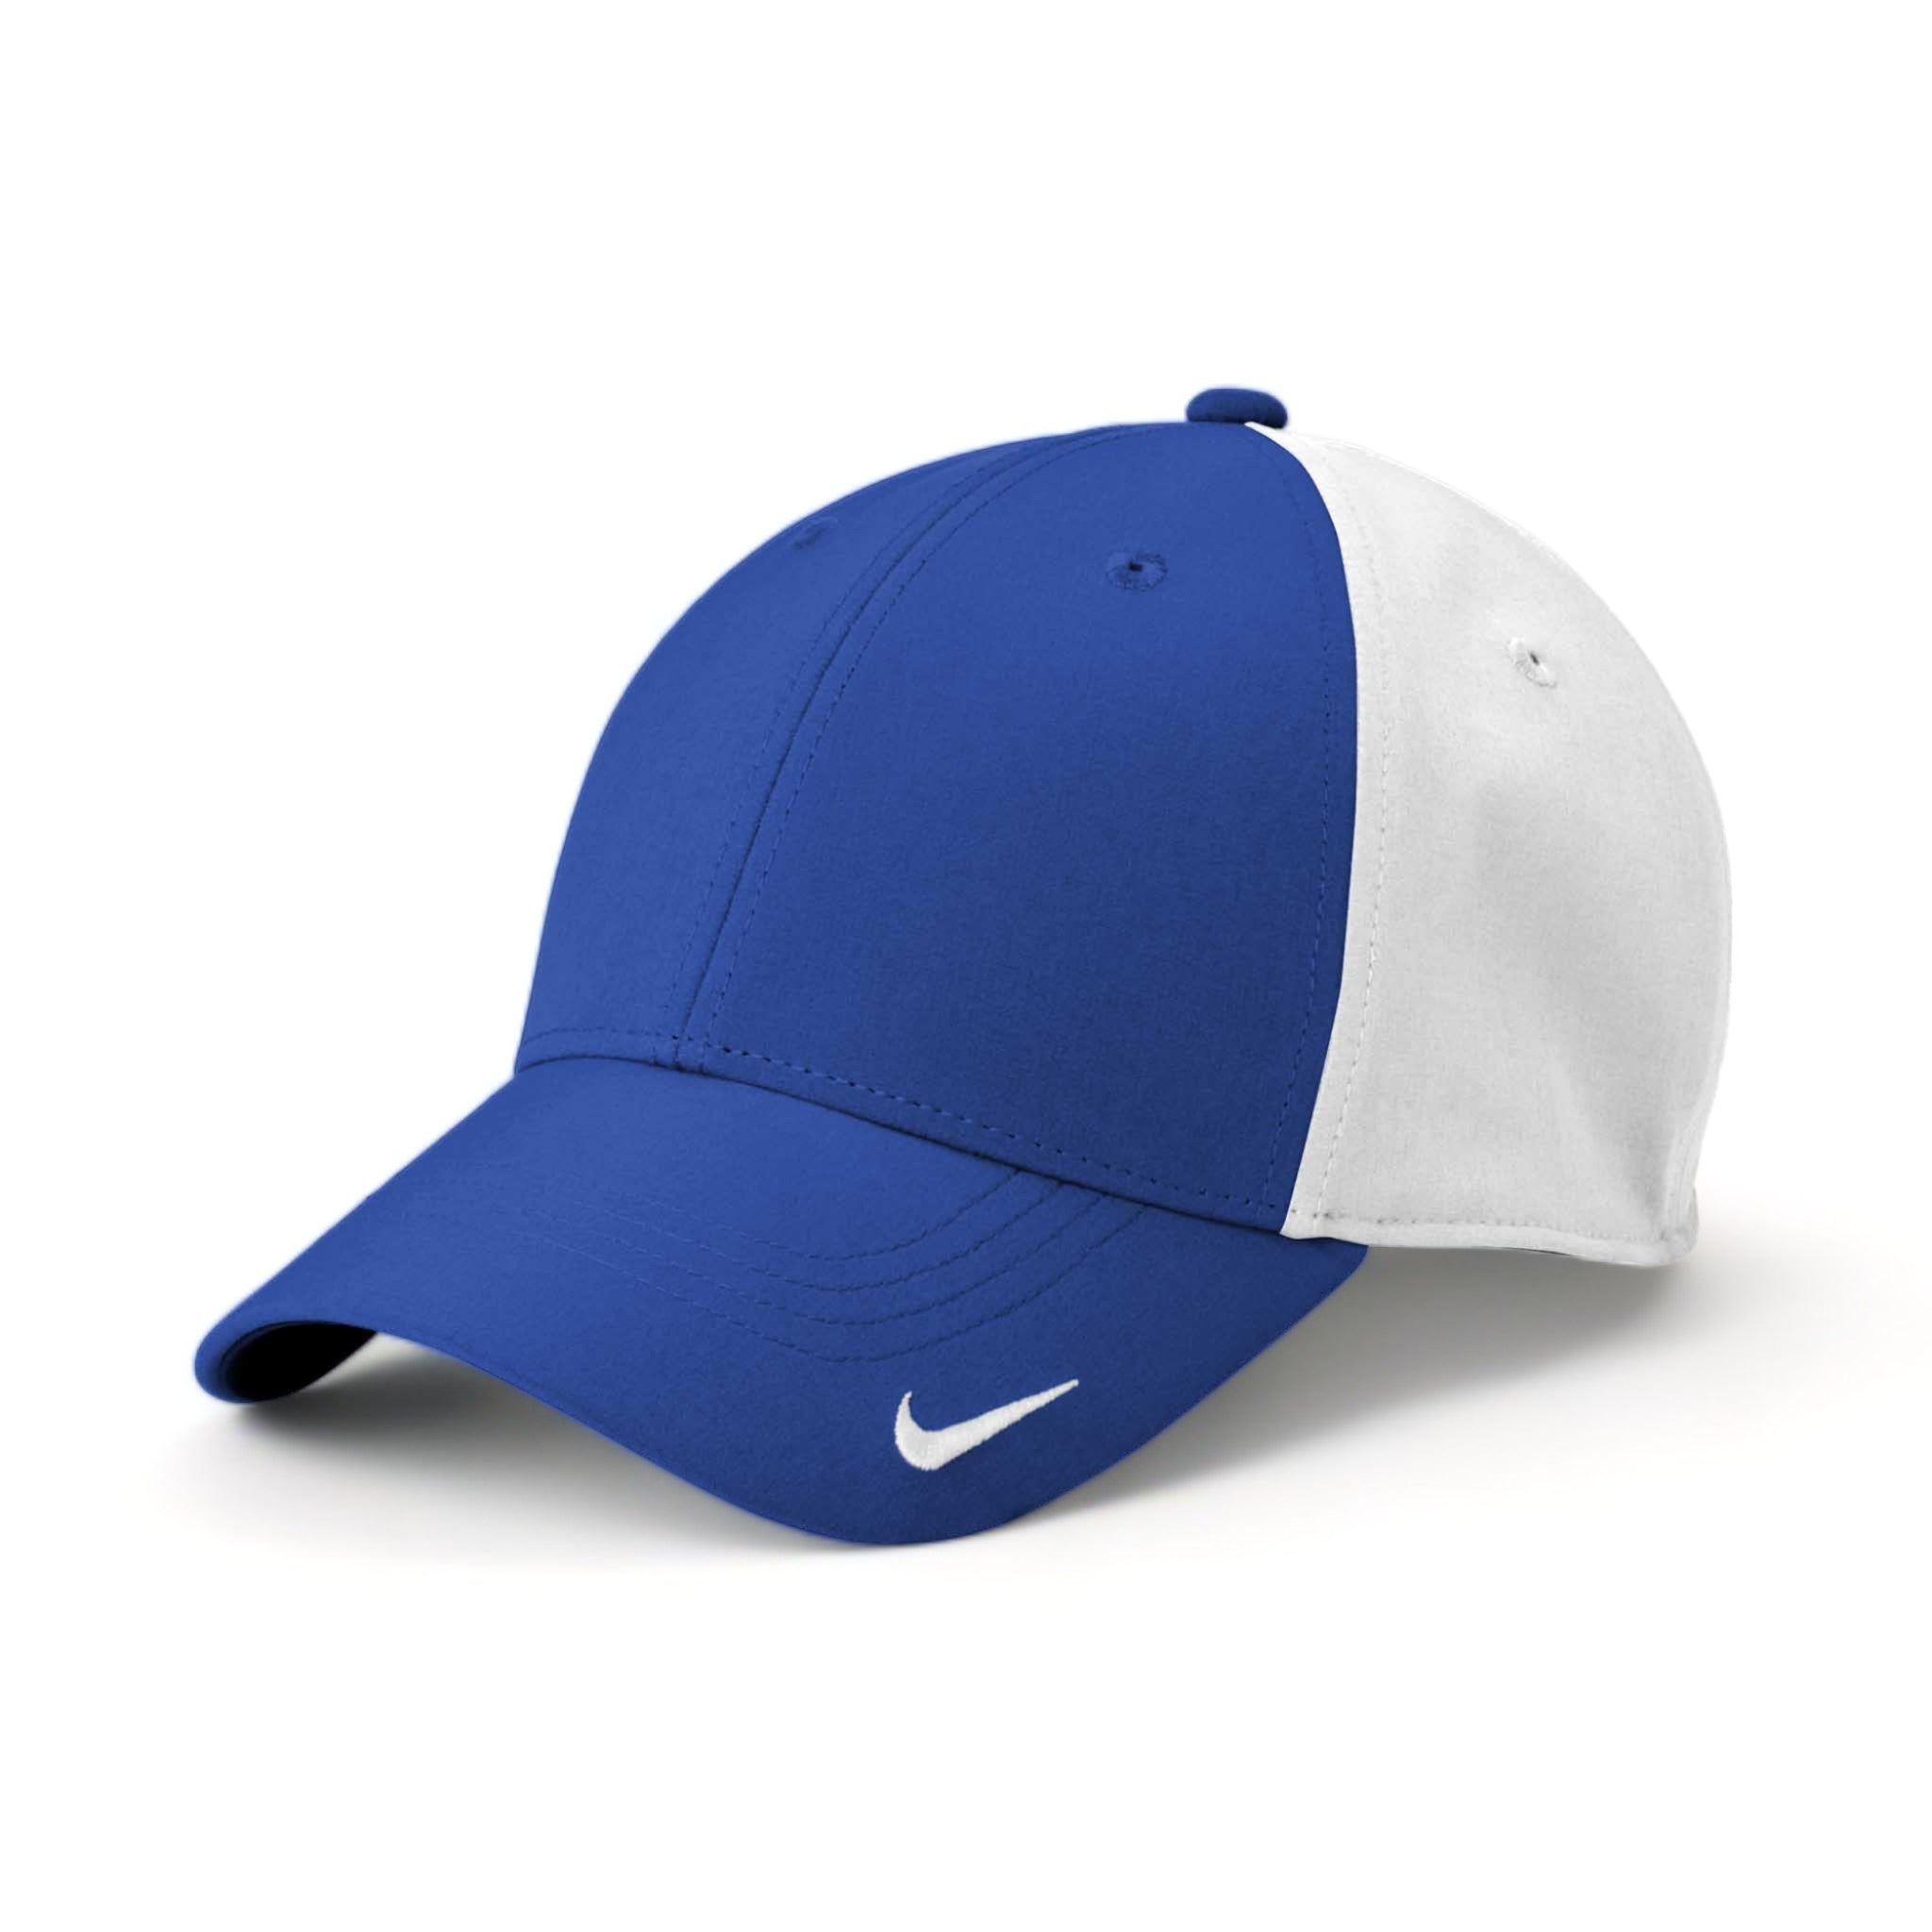 Side view of Nike NKFB6447 custom hat in game royal and white